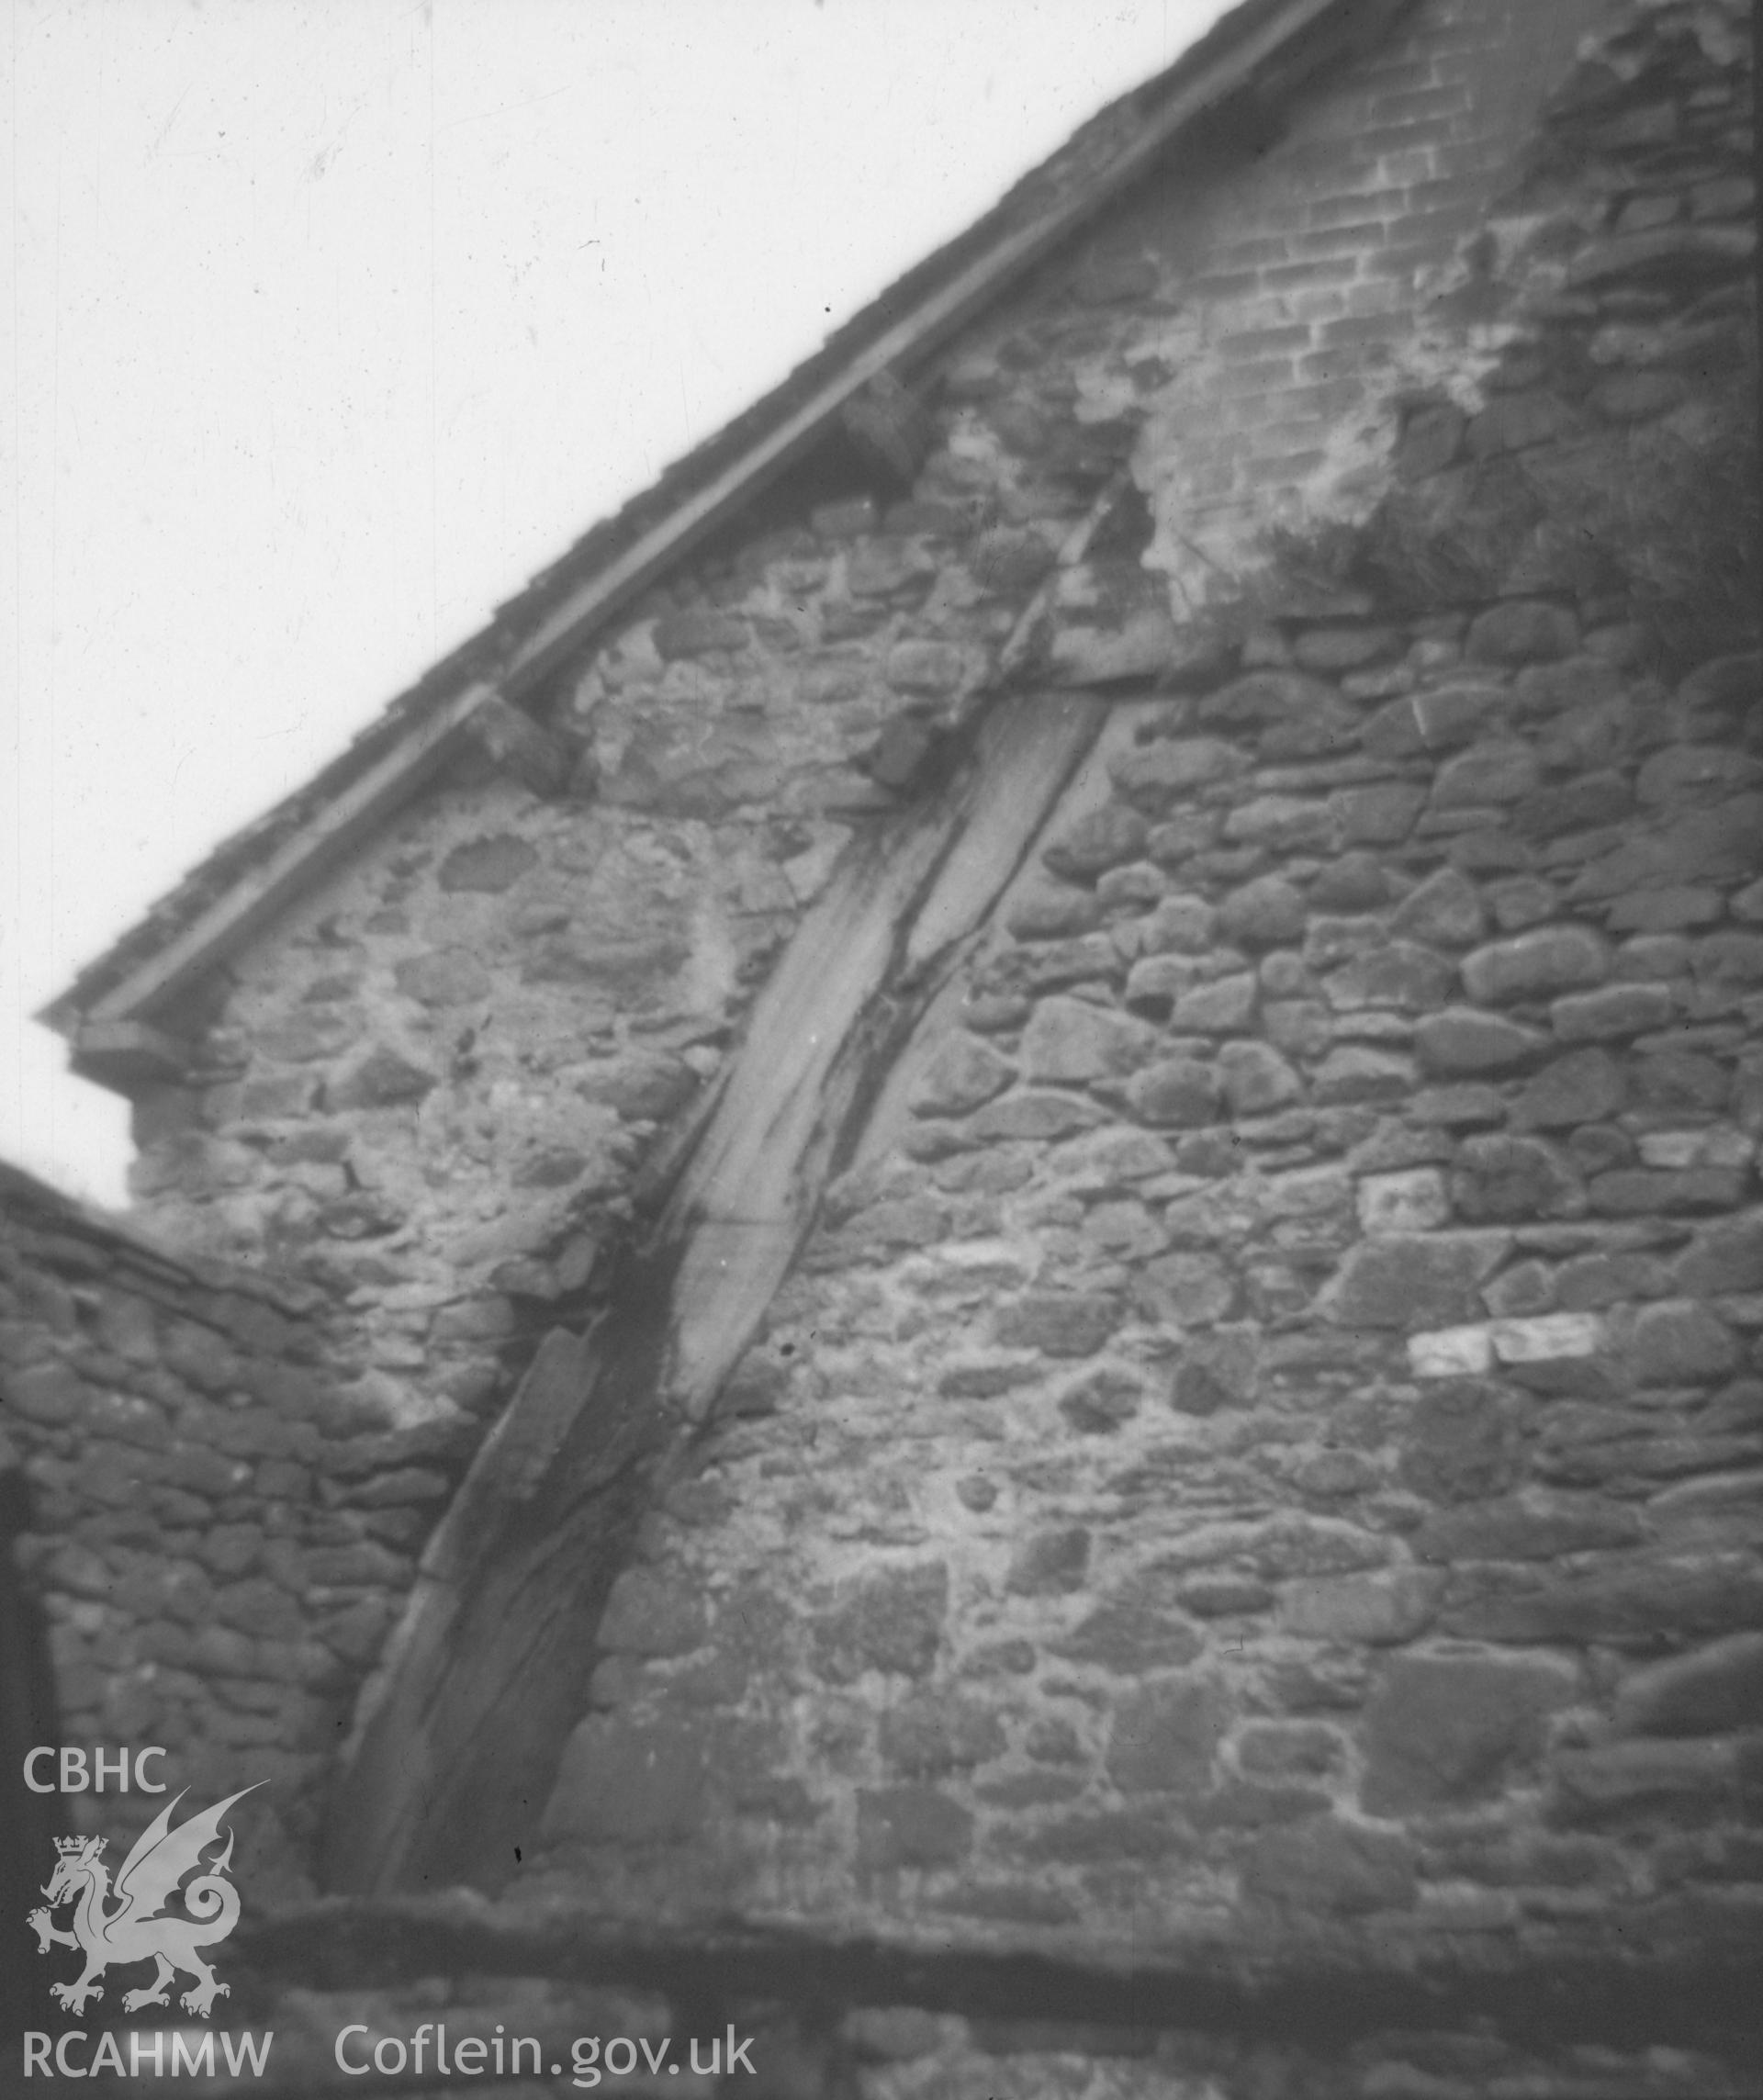 Copy transparency of black and white historic print of exterior timber detail at Ty'n y Beili, Llanafan Fawr. From an original held at Brecon Museum, undated.